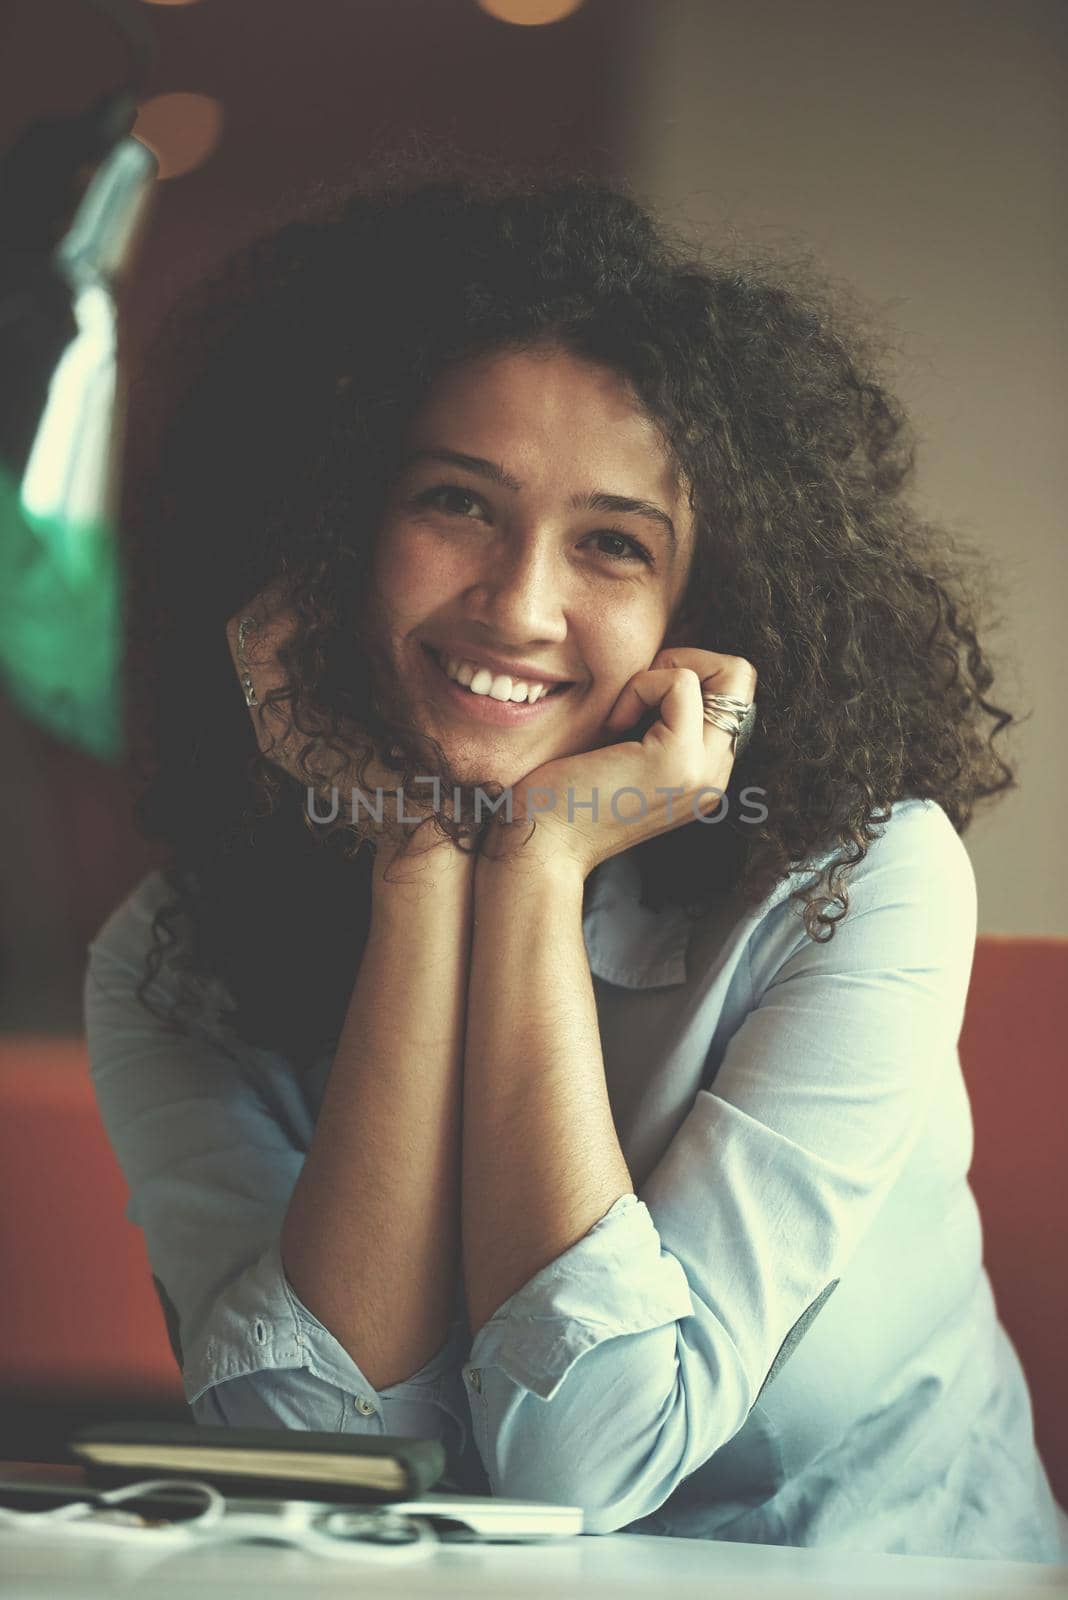 happy young  business woman with curly hairstyle in the modern office